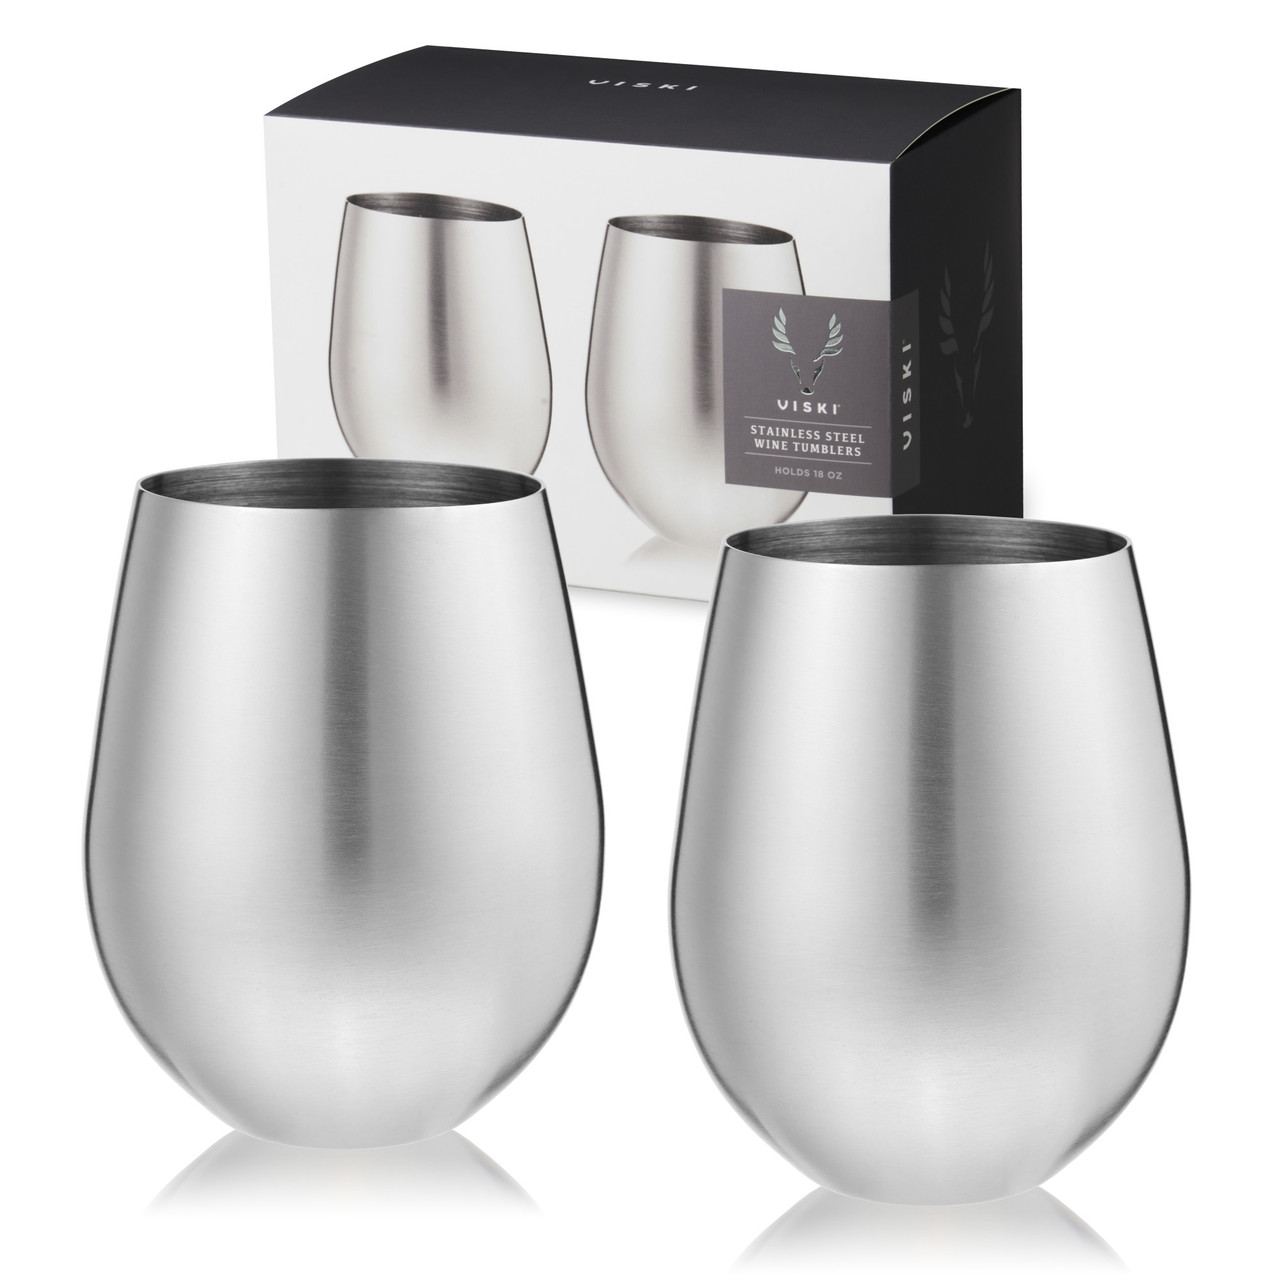 https://cdn11.bigcommerce.com/s-oo0gdojvjo/images/stencil/1280x1280/products/68859/101001/stainless-steel-stemless-wine-tumblers-by-viski-set-of-2__10941.1683777576.jpg?c=2